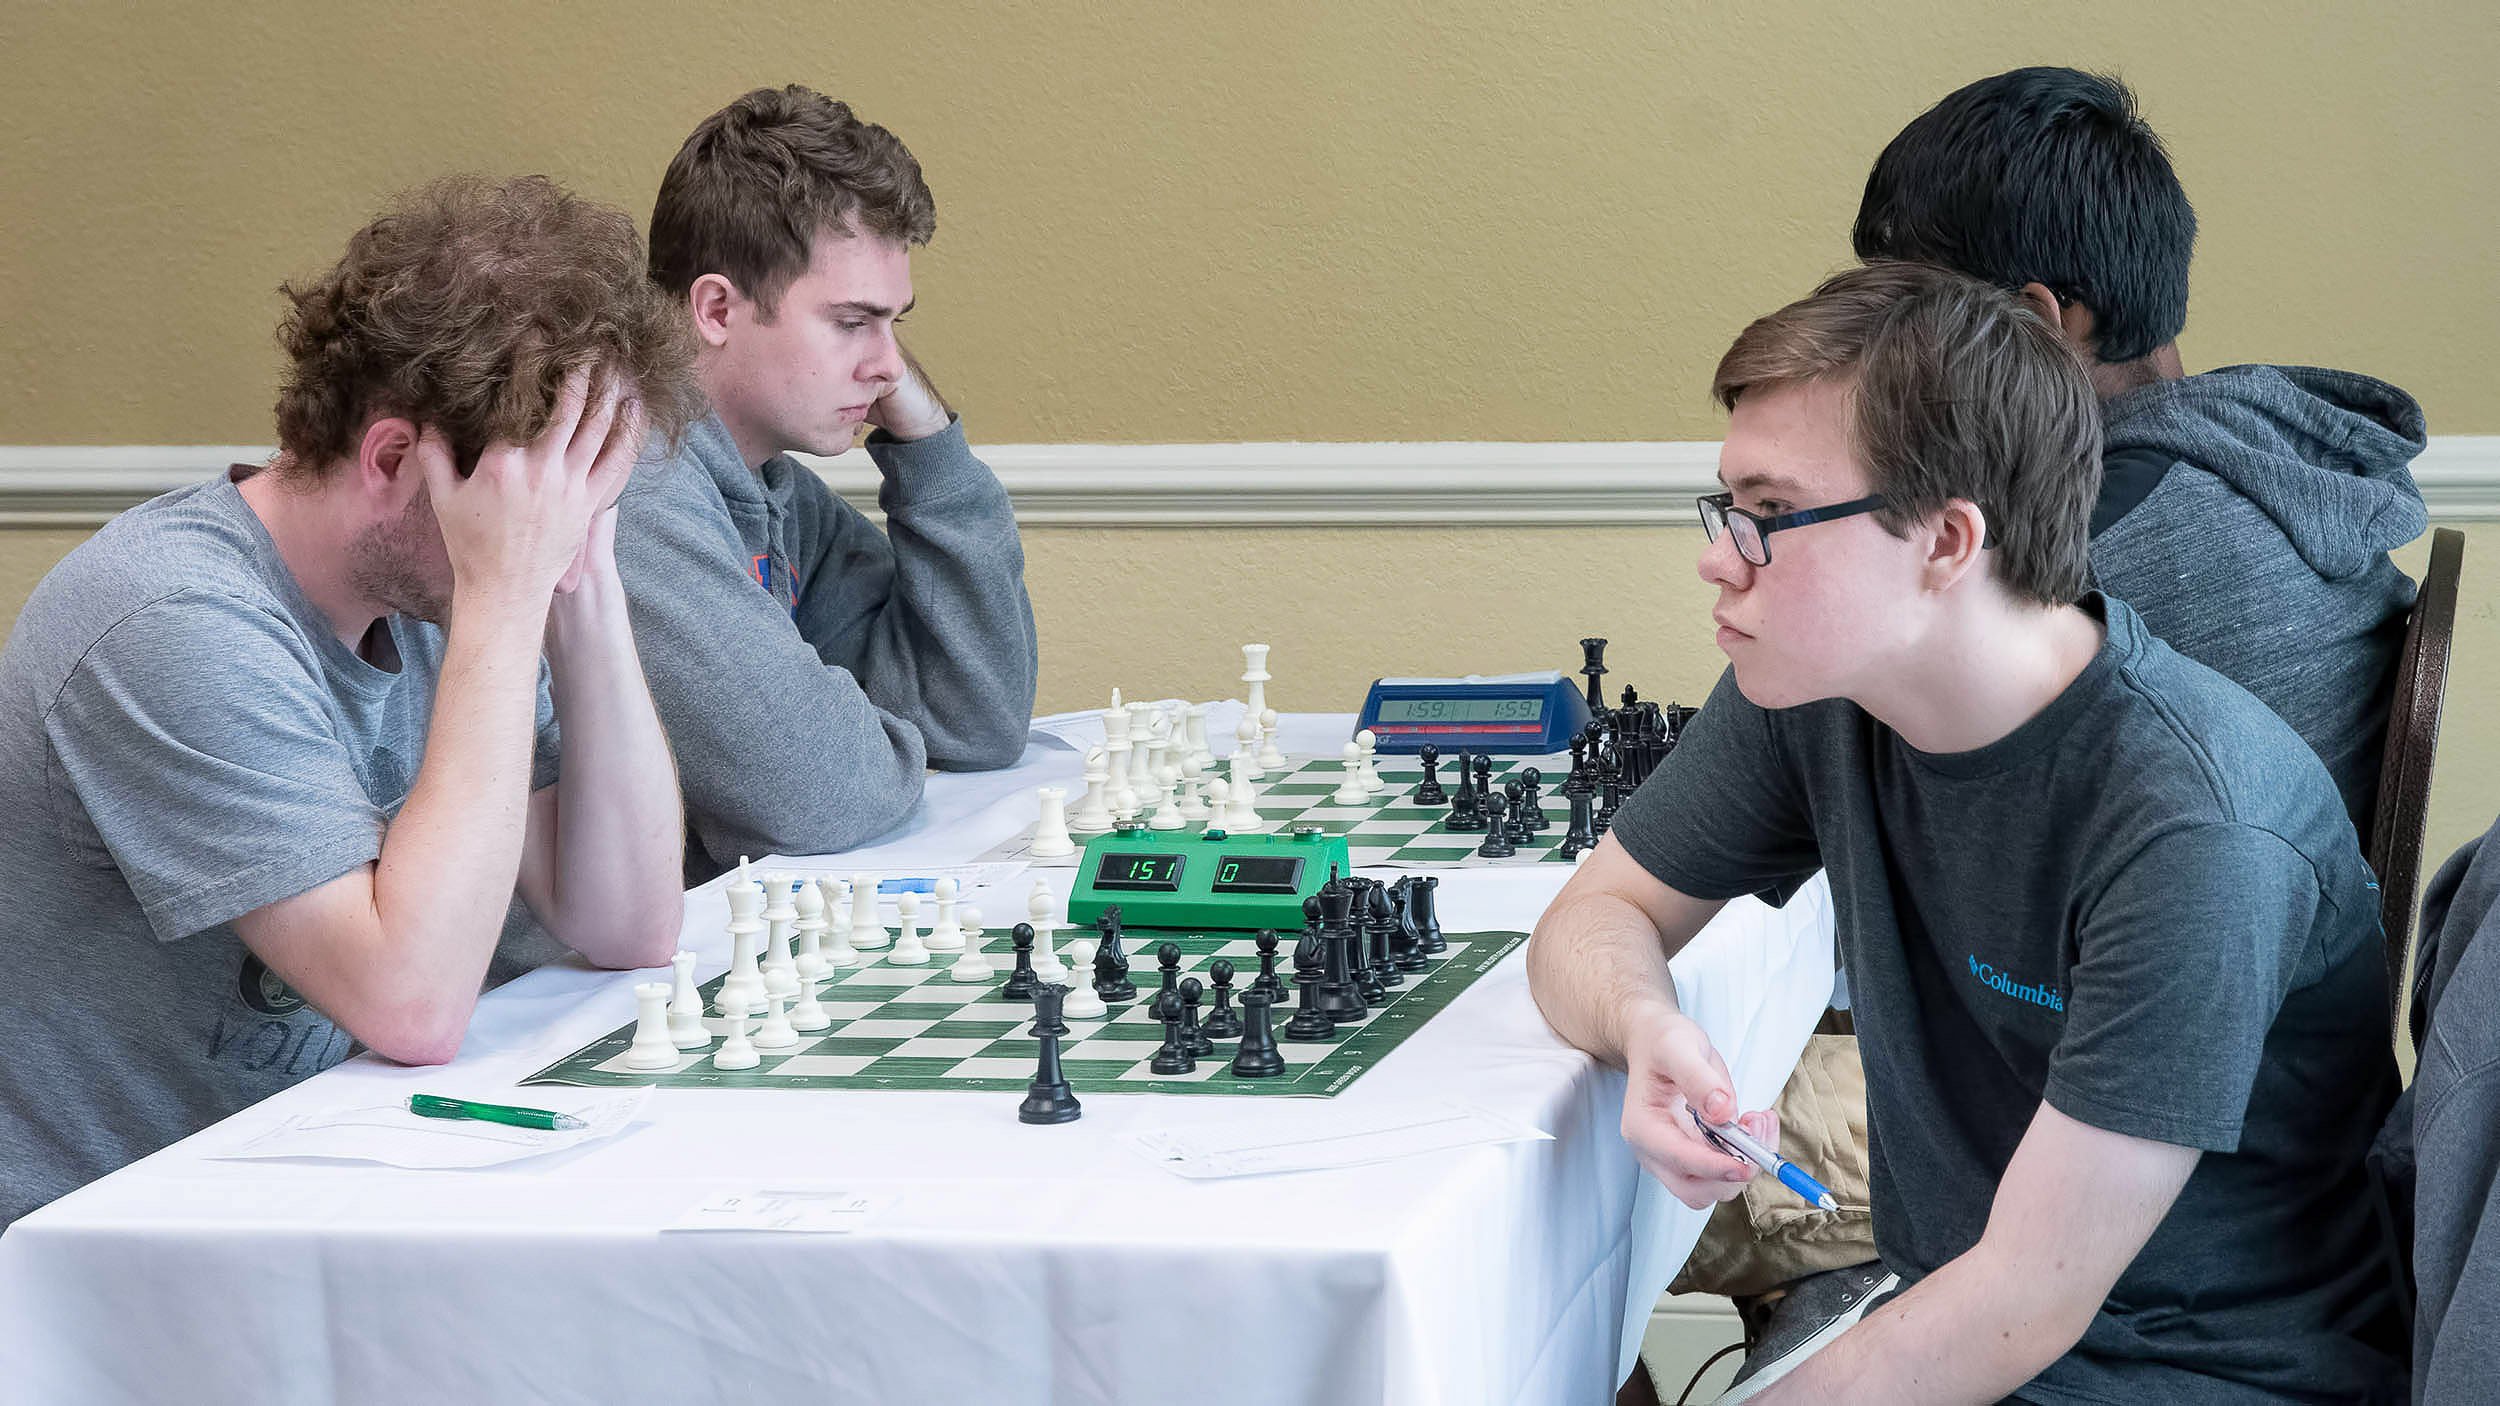 Unsavory allegations rock chess world as American teen shocks No. 1 player  in tournament